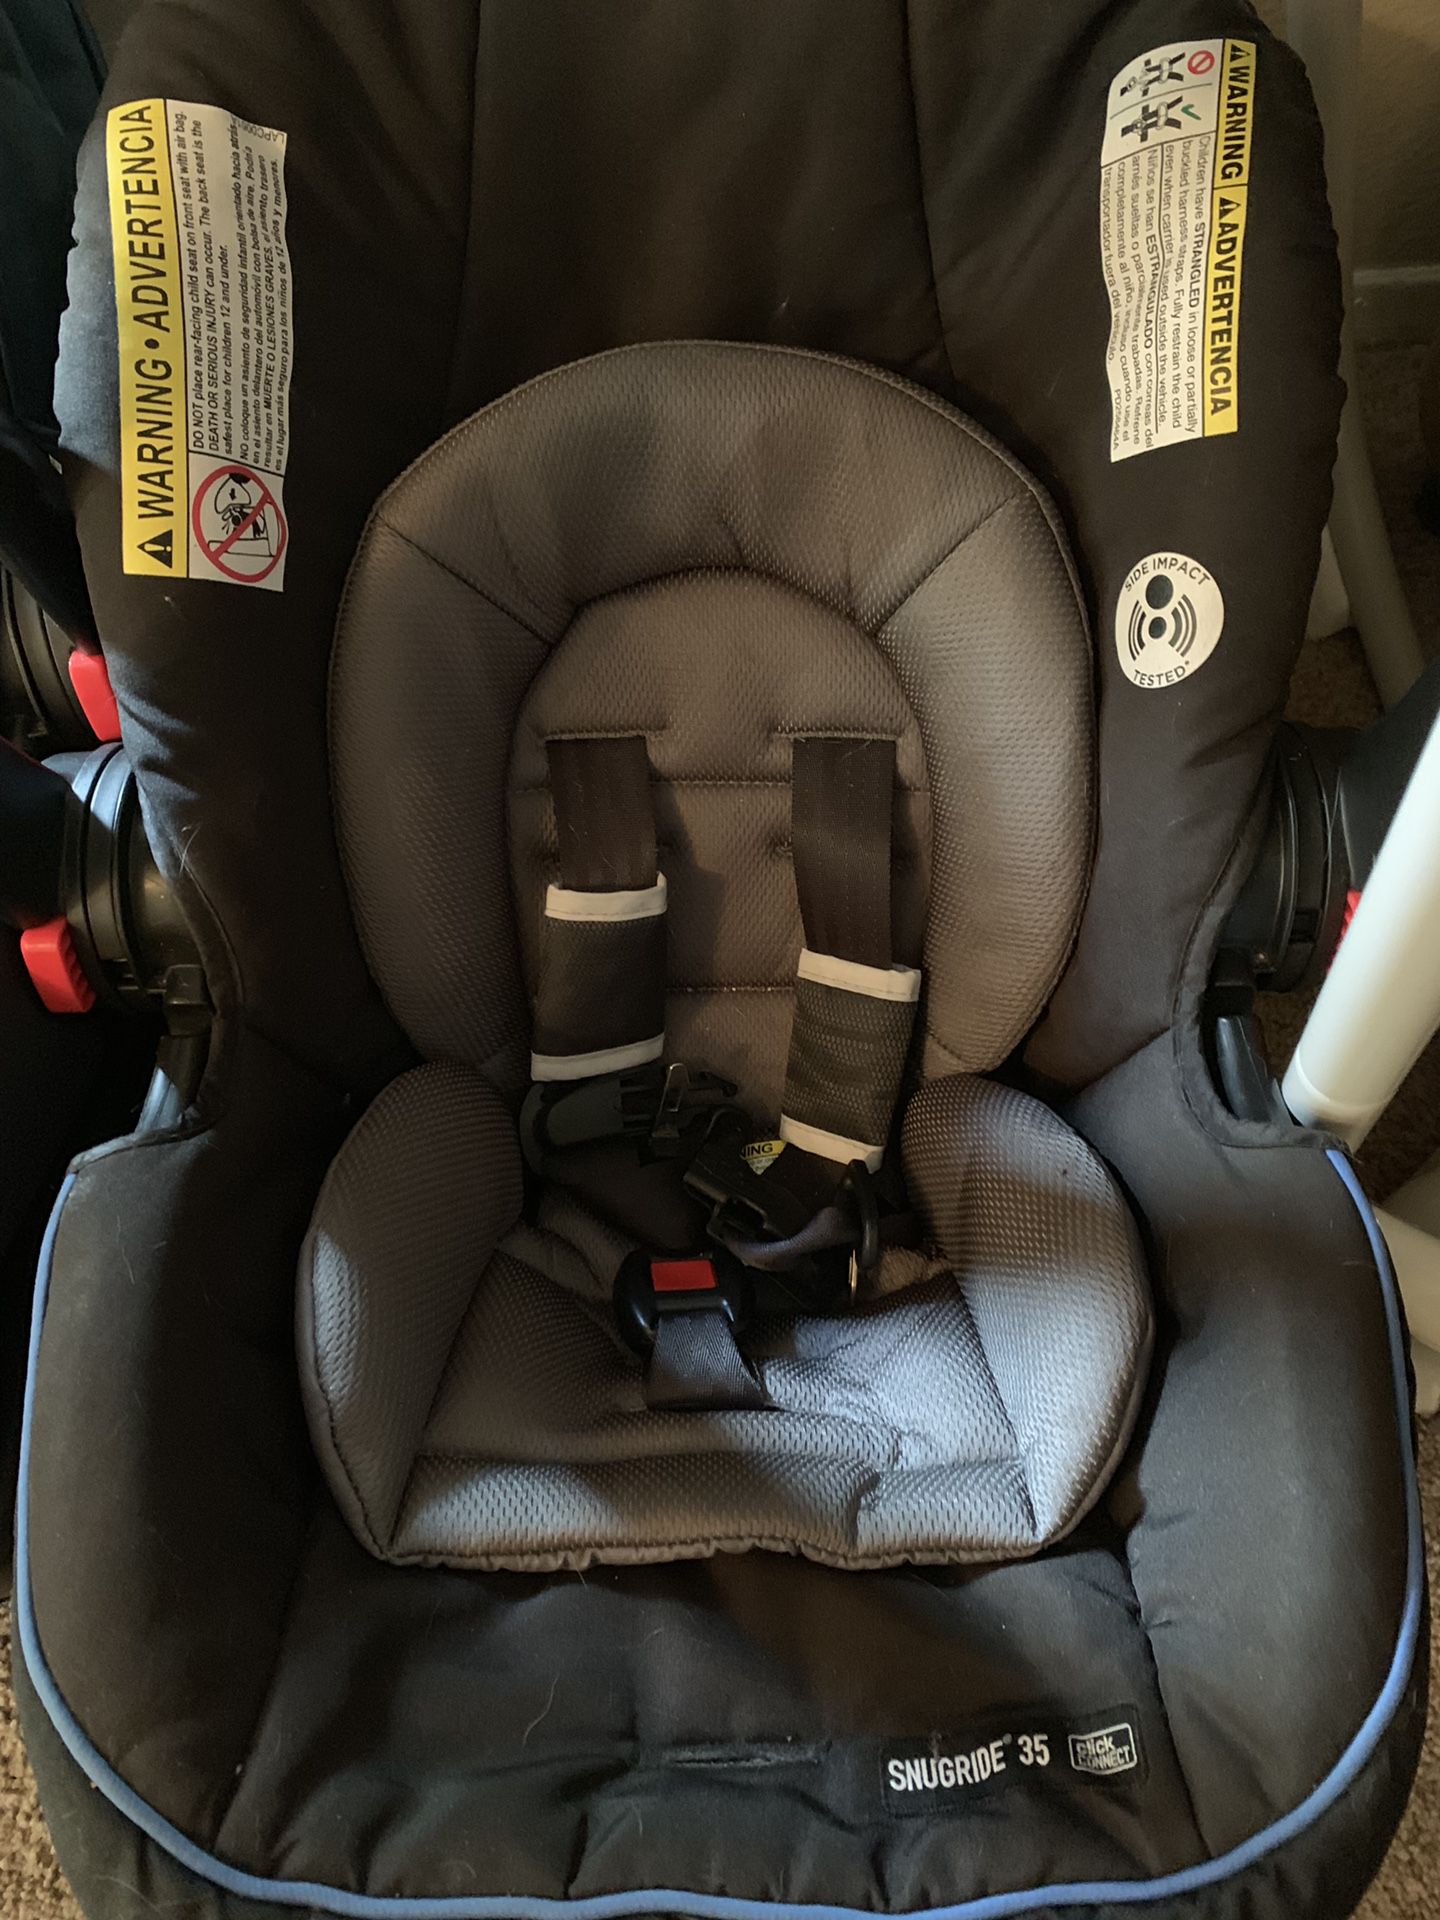 Graco Snugride 35 click connect infant car seat with base!